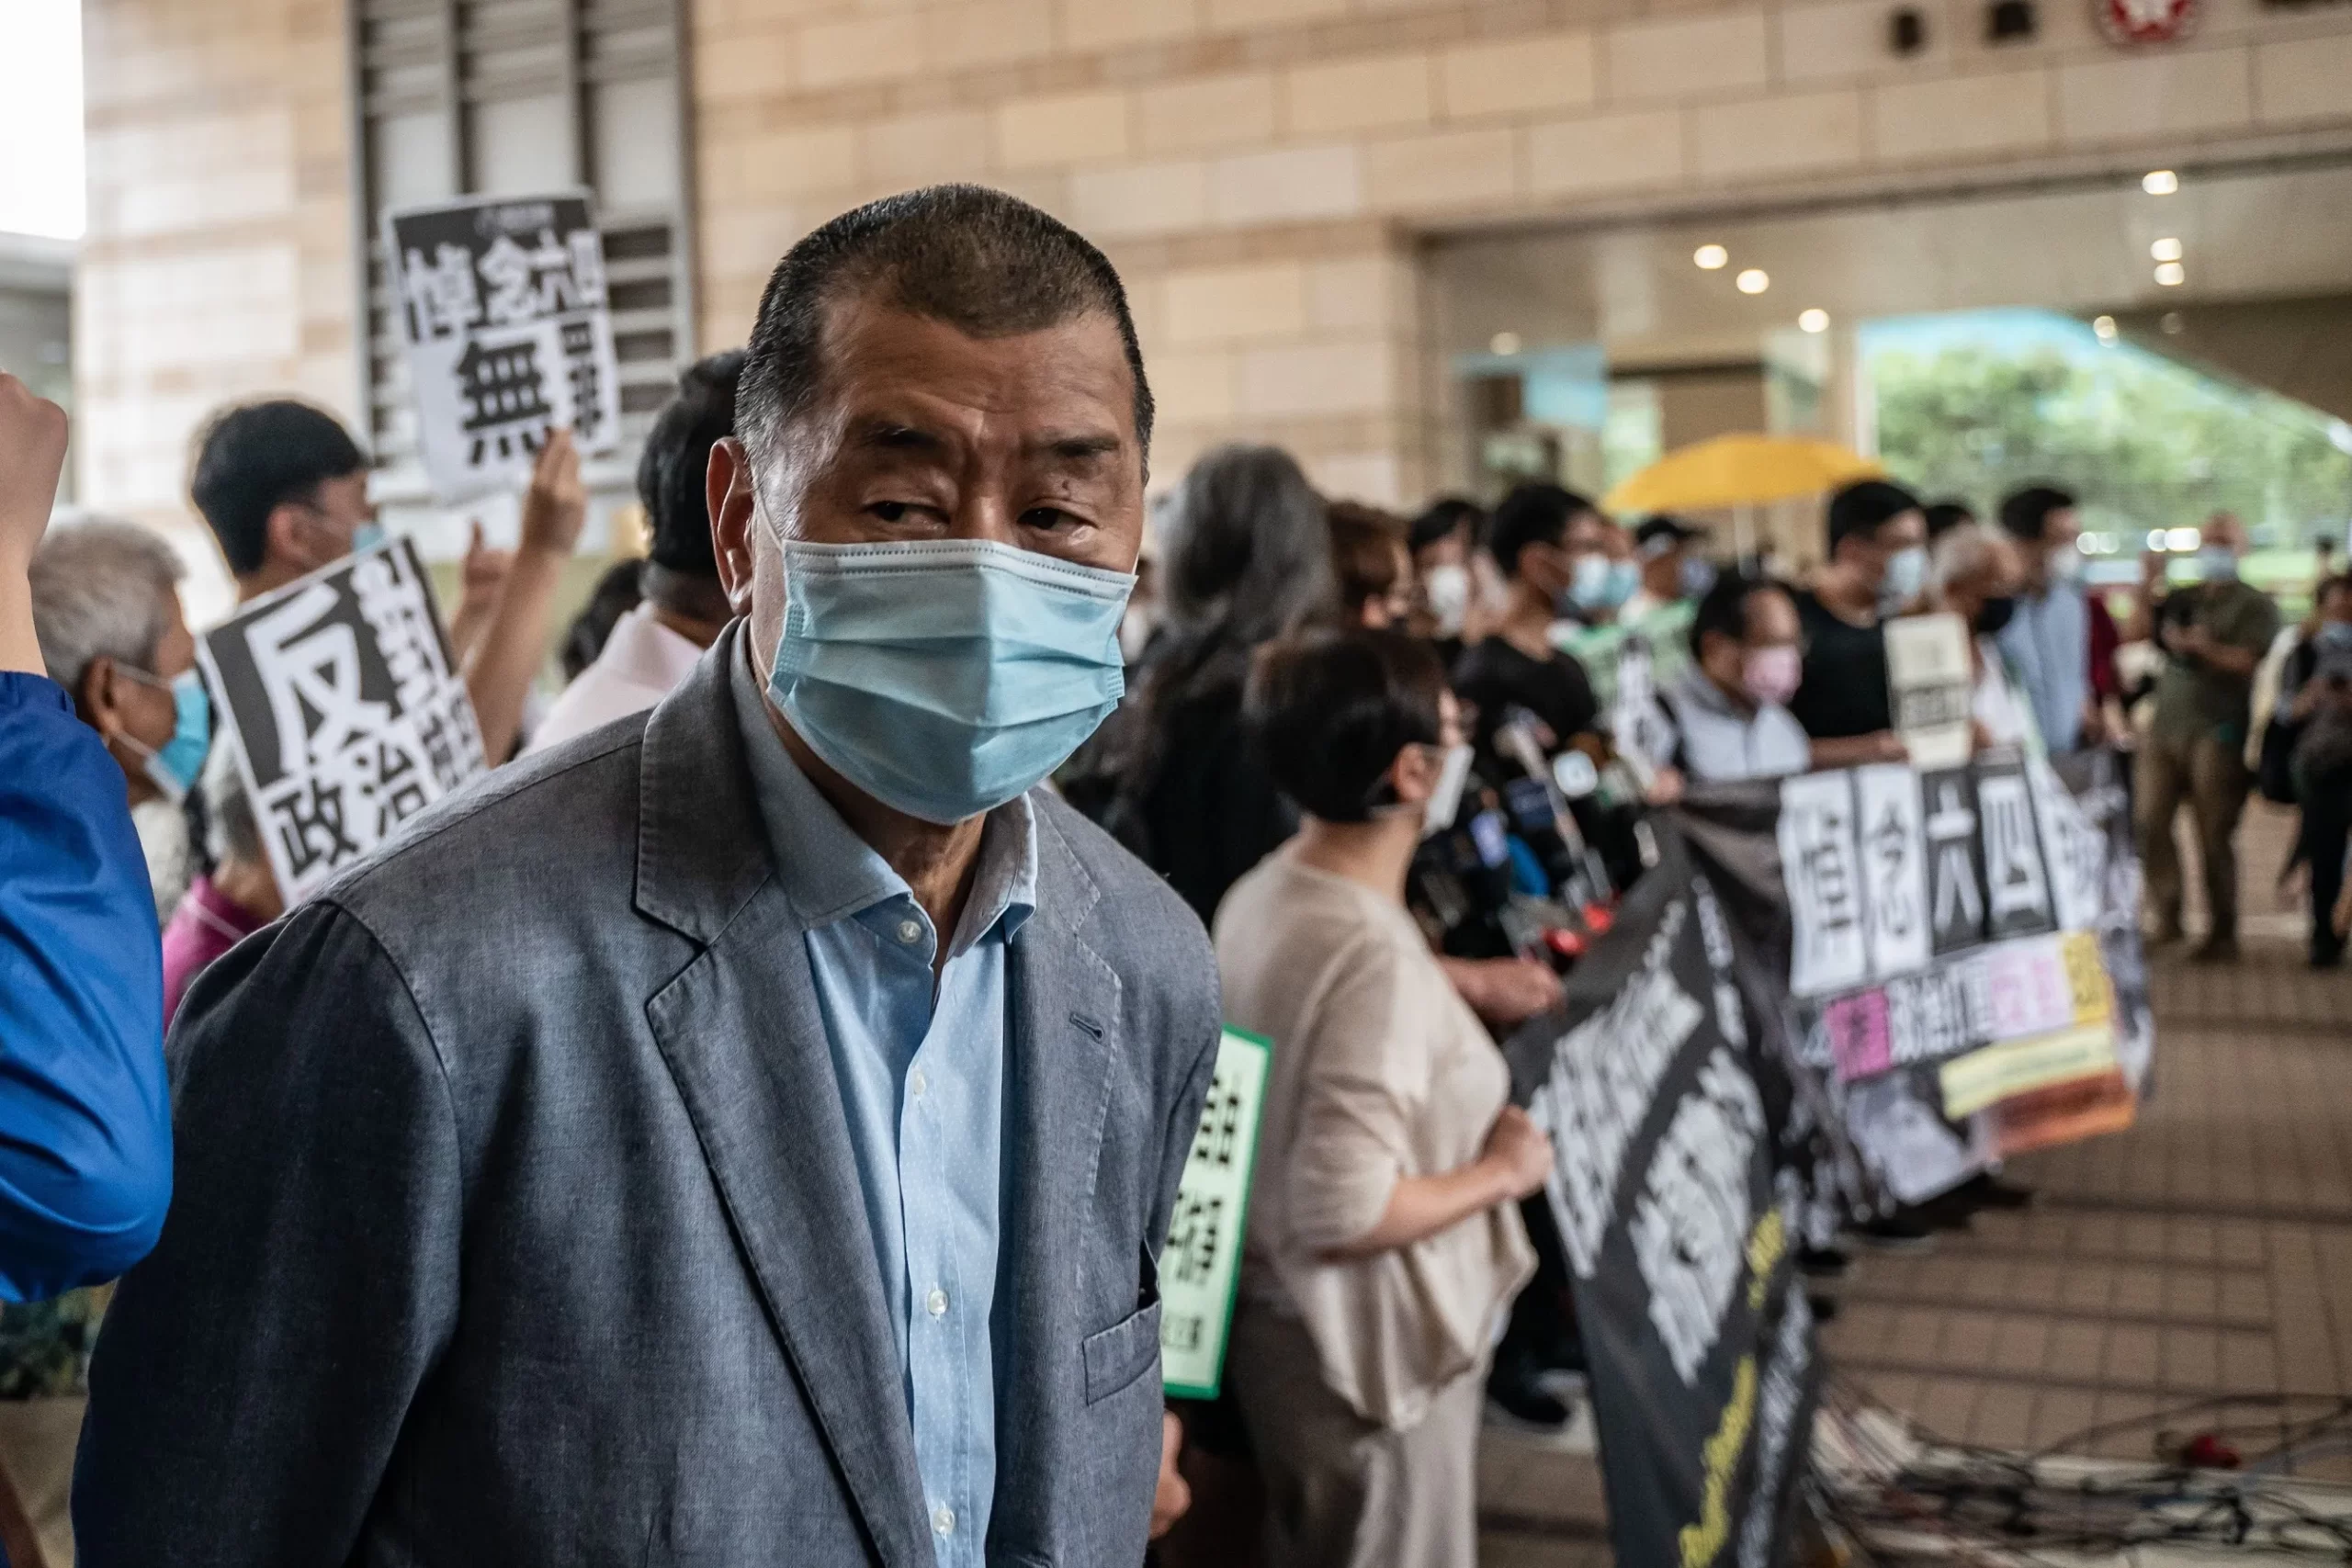 Jimmy Lai at a protest in Hong Kong. Courtesy of the Acton Institute